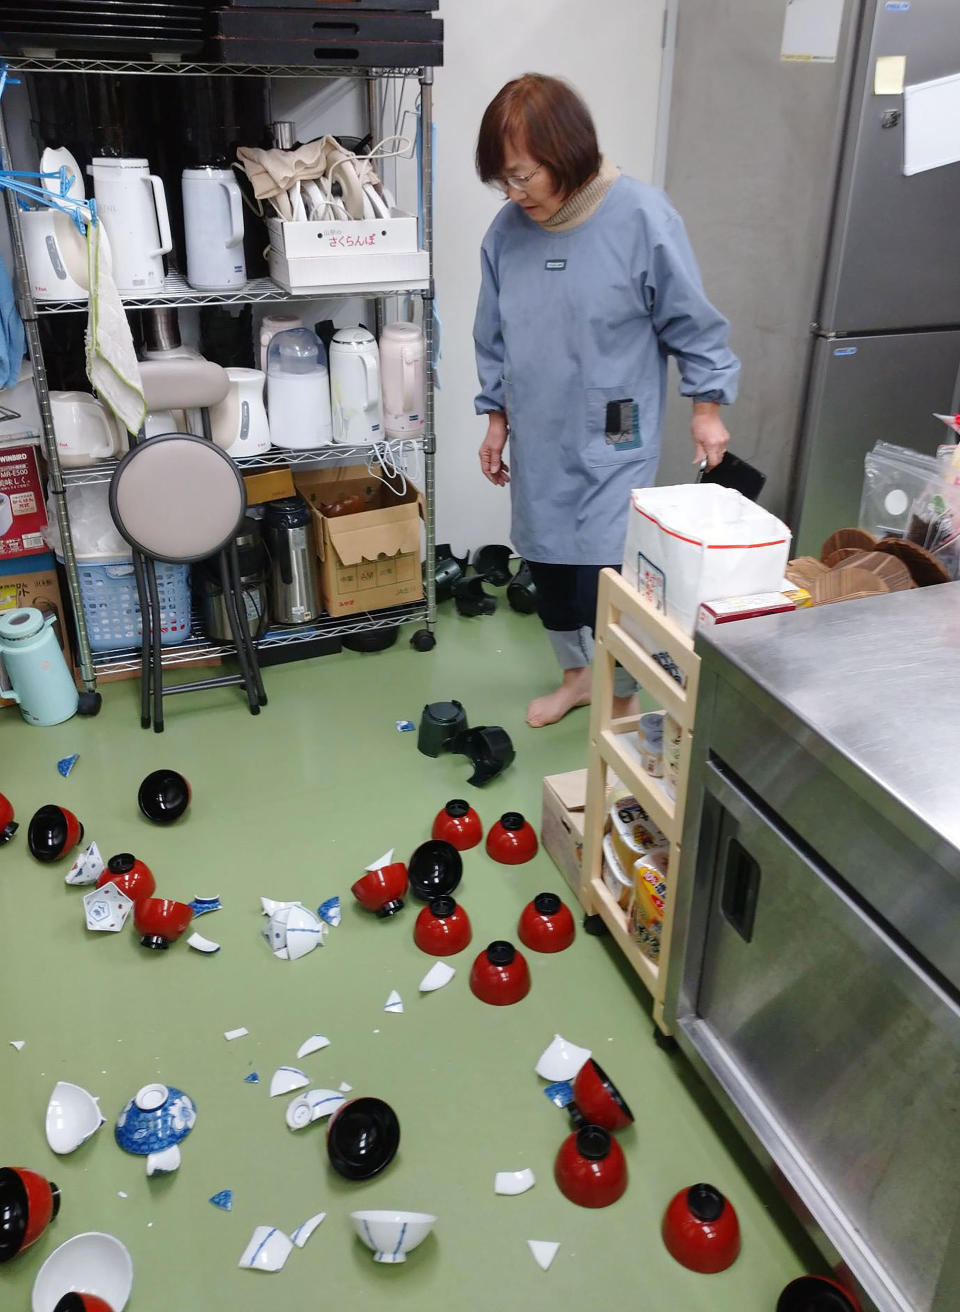 A landlady of a Japanese style hotel stands near damaged bowls following an earthquake in Minamisoma, Fukushima prefecture, northeastern Japan Saturday, Feb. 13, 2021. The Japan Meteorological Agency says a strong earthquake has hit off the coast of northeastern Japan, shaking Fukushima, Miyagi and other areas. (Tomomi Miura/Kyodo News via AP)